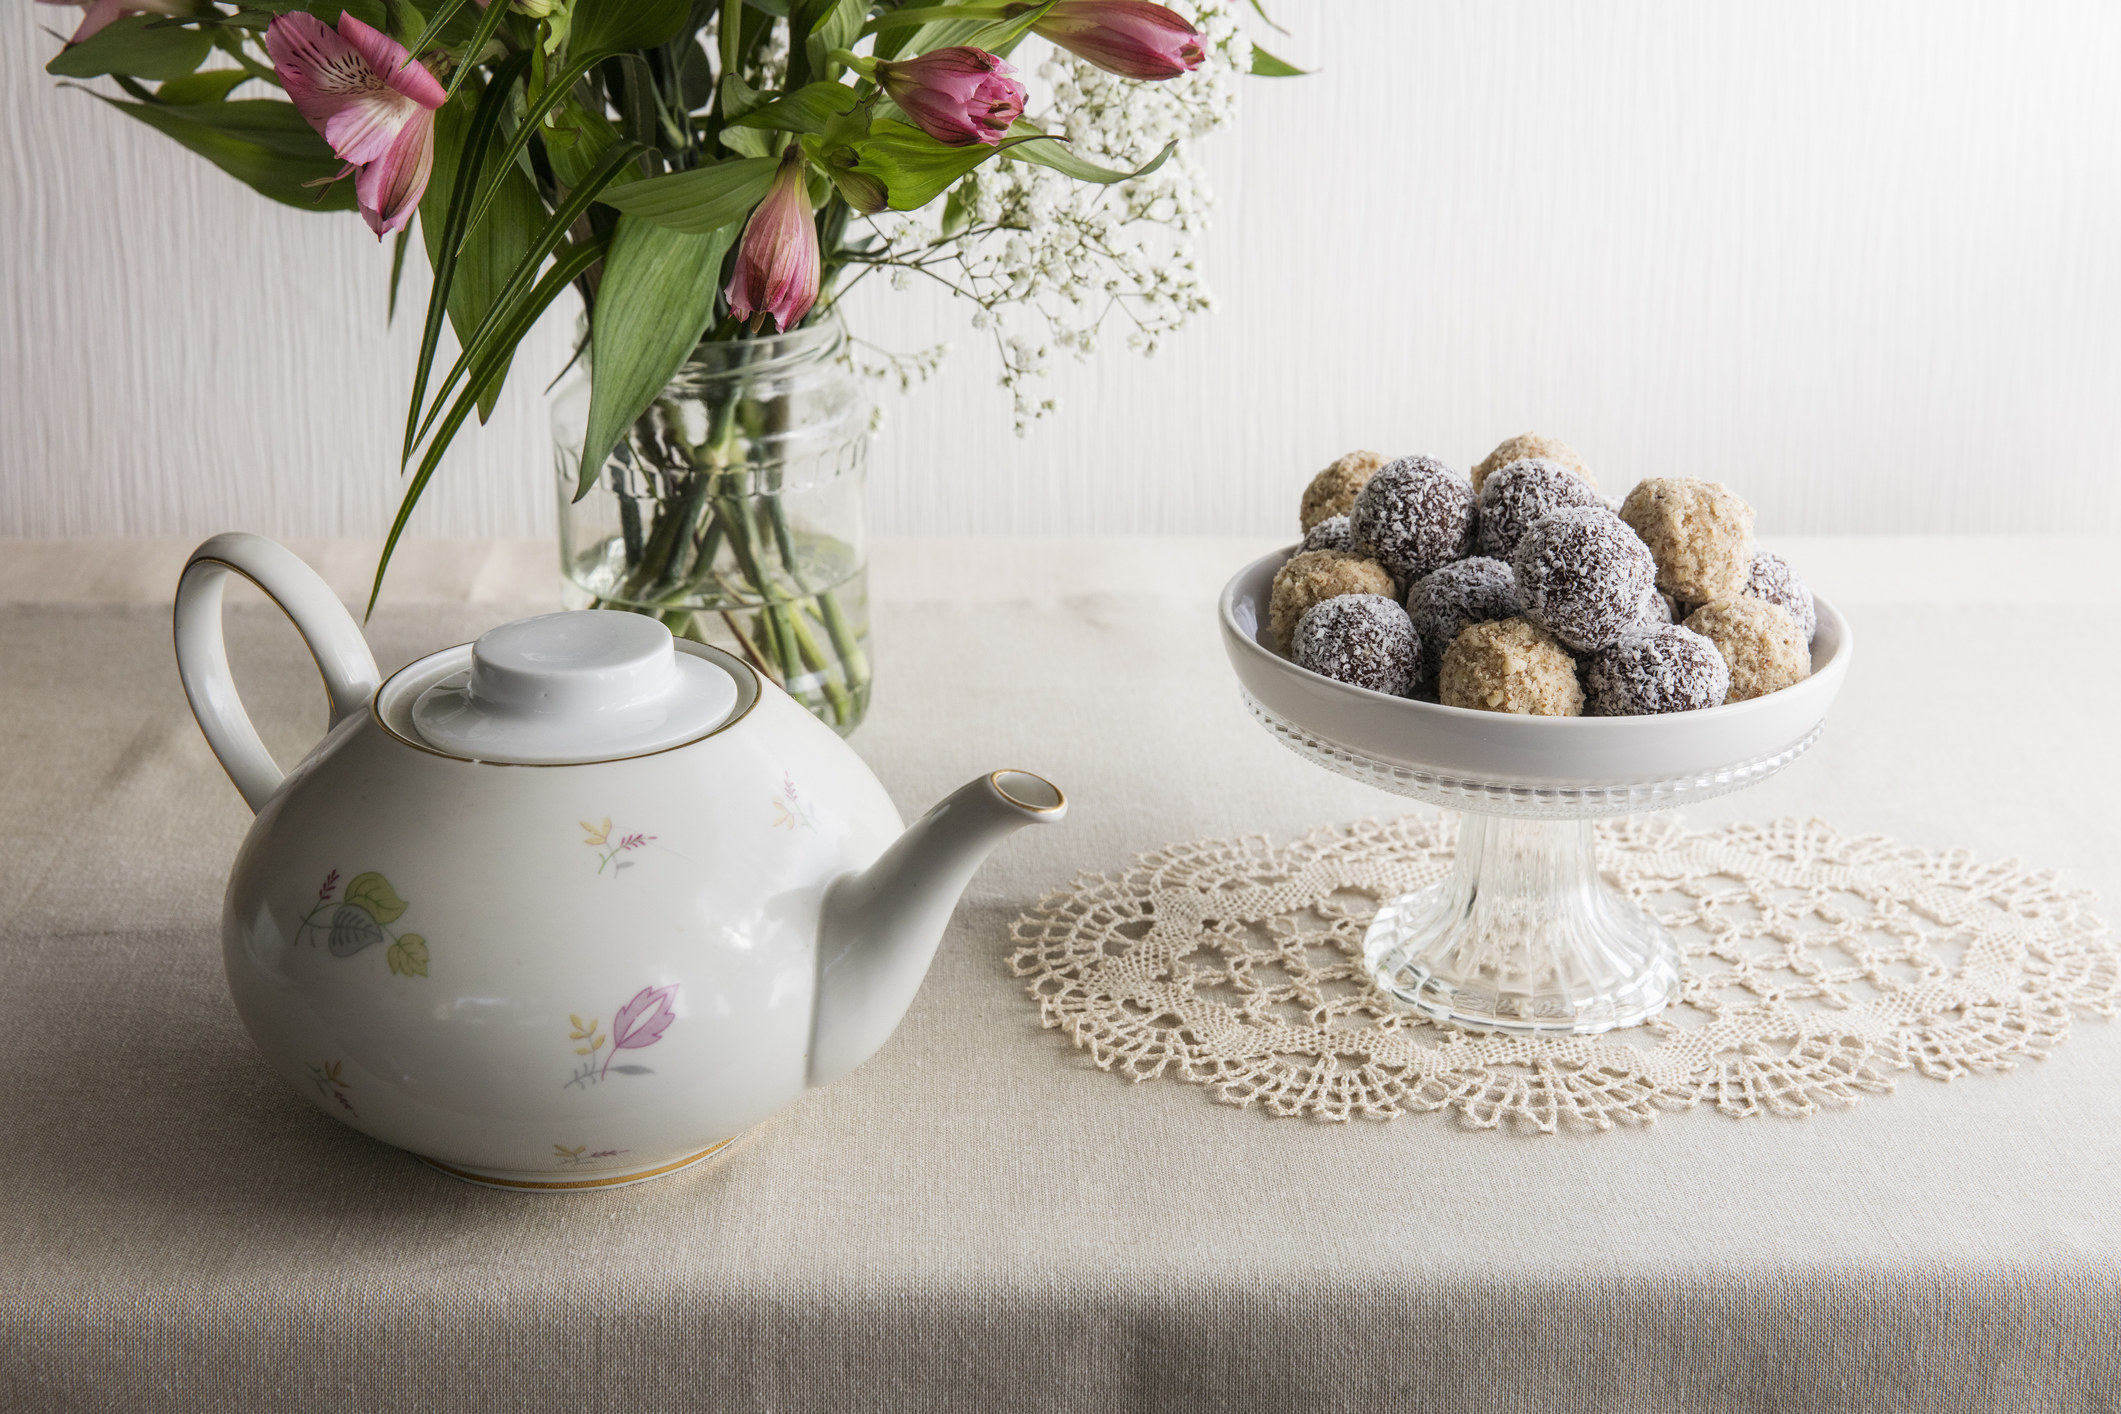 A teacup, vase with flowers, and truffle chocolates in a platter with a doily below it